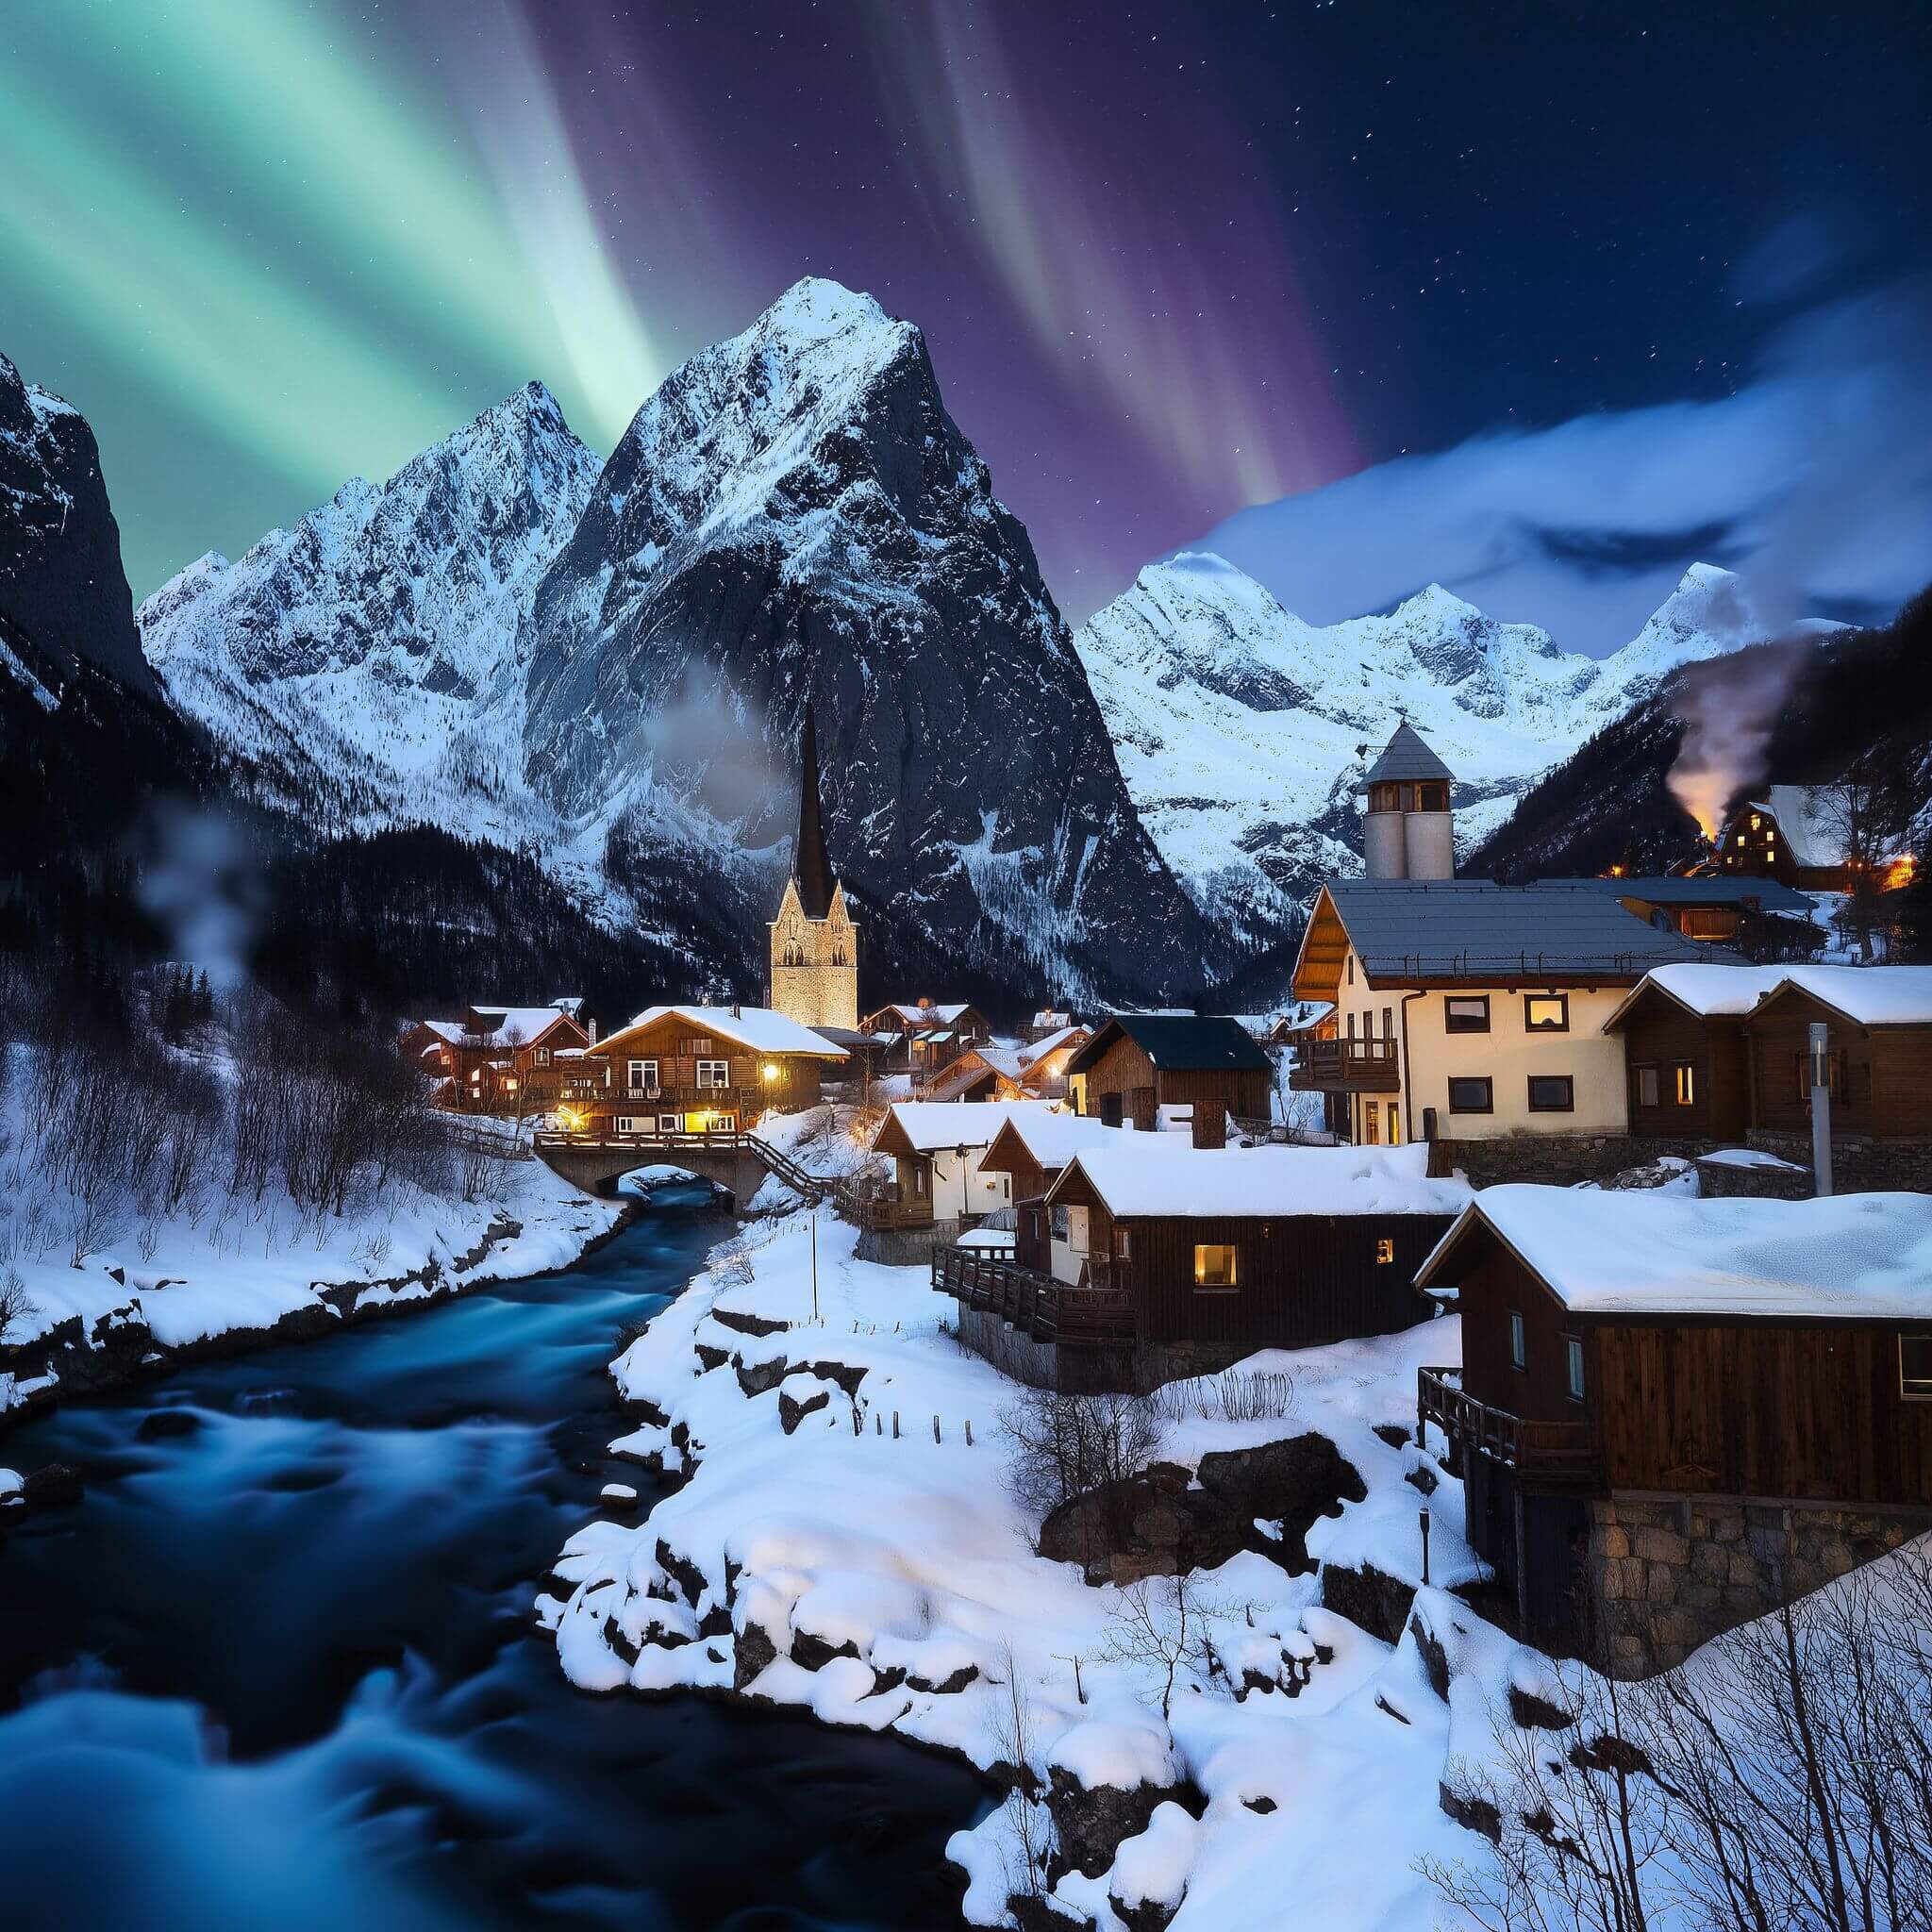 A snowy mountain village with cozy cabins and a northern lights display, high detail and photorealistic dslr, 50mm f/1.2